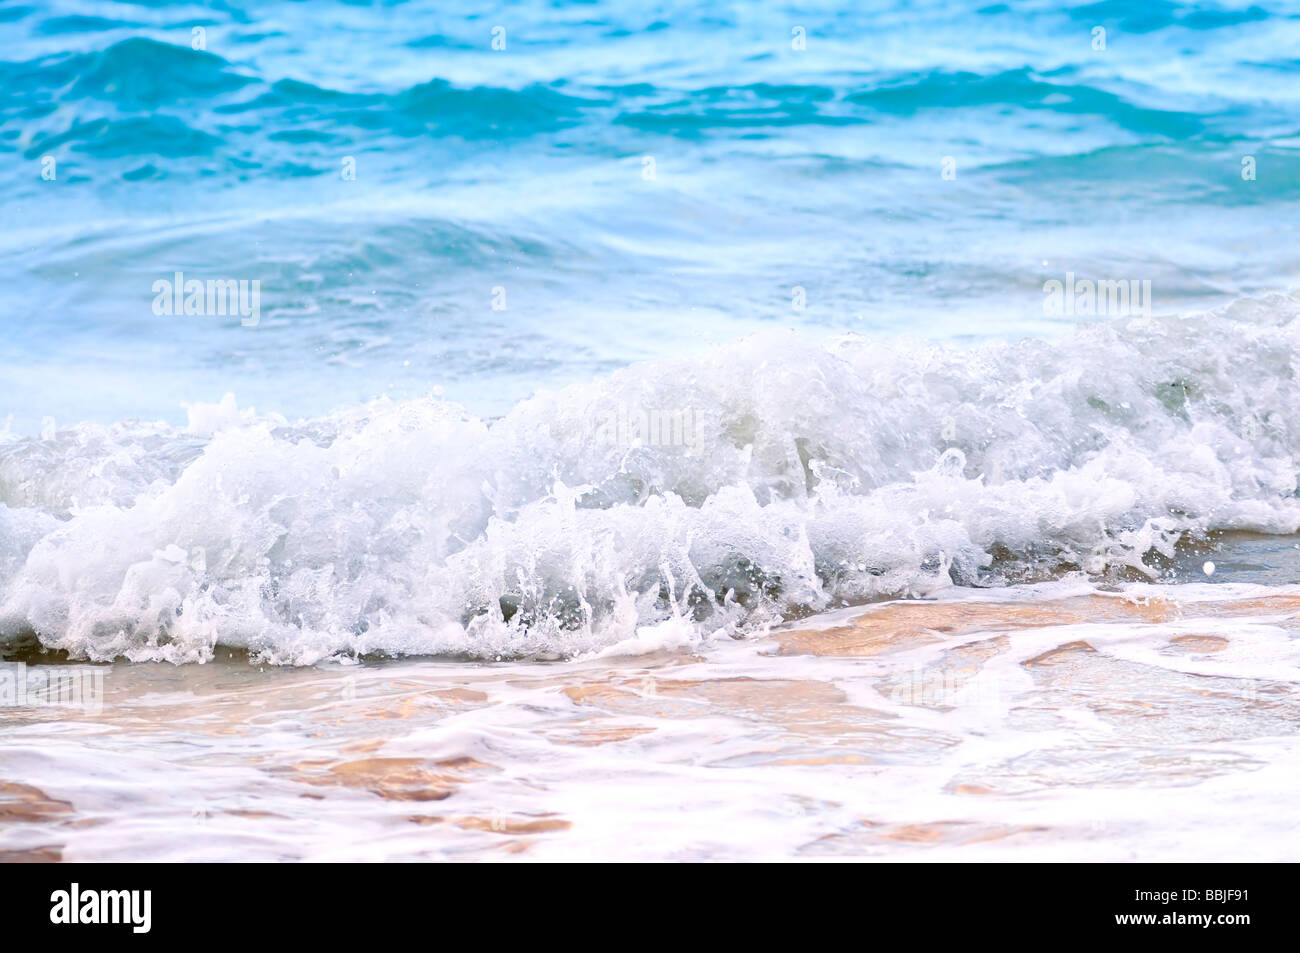 Tropical Caribbean sea waves breaking on the shore Stock Photo